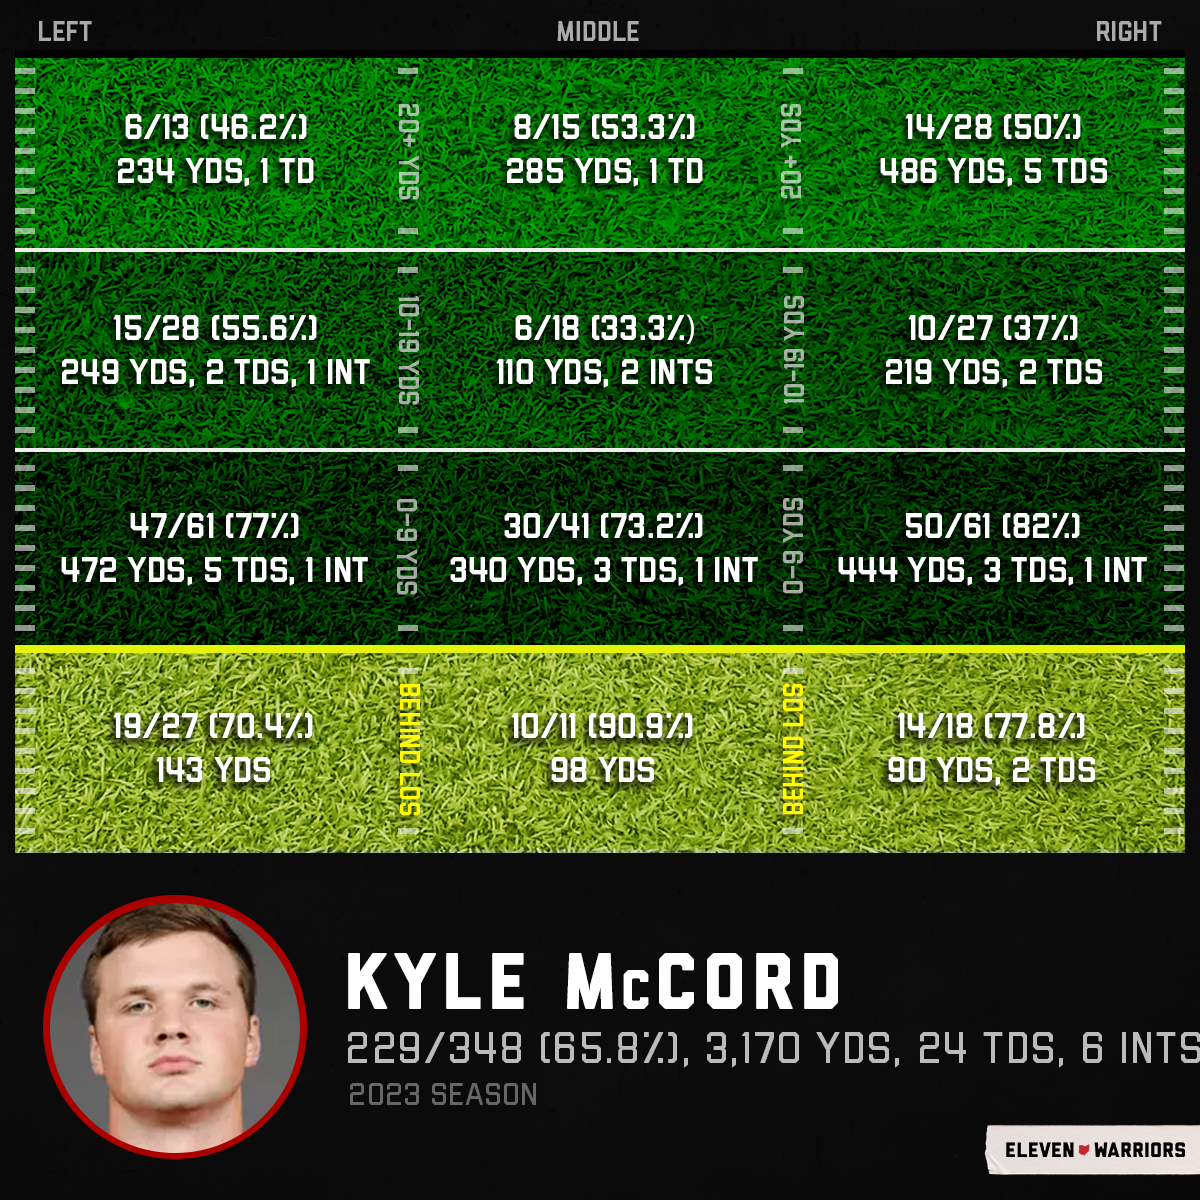 Kyle McCord's passing chart through 12 games 2023